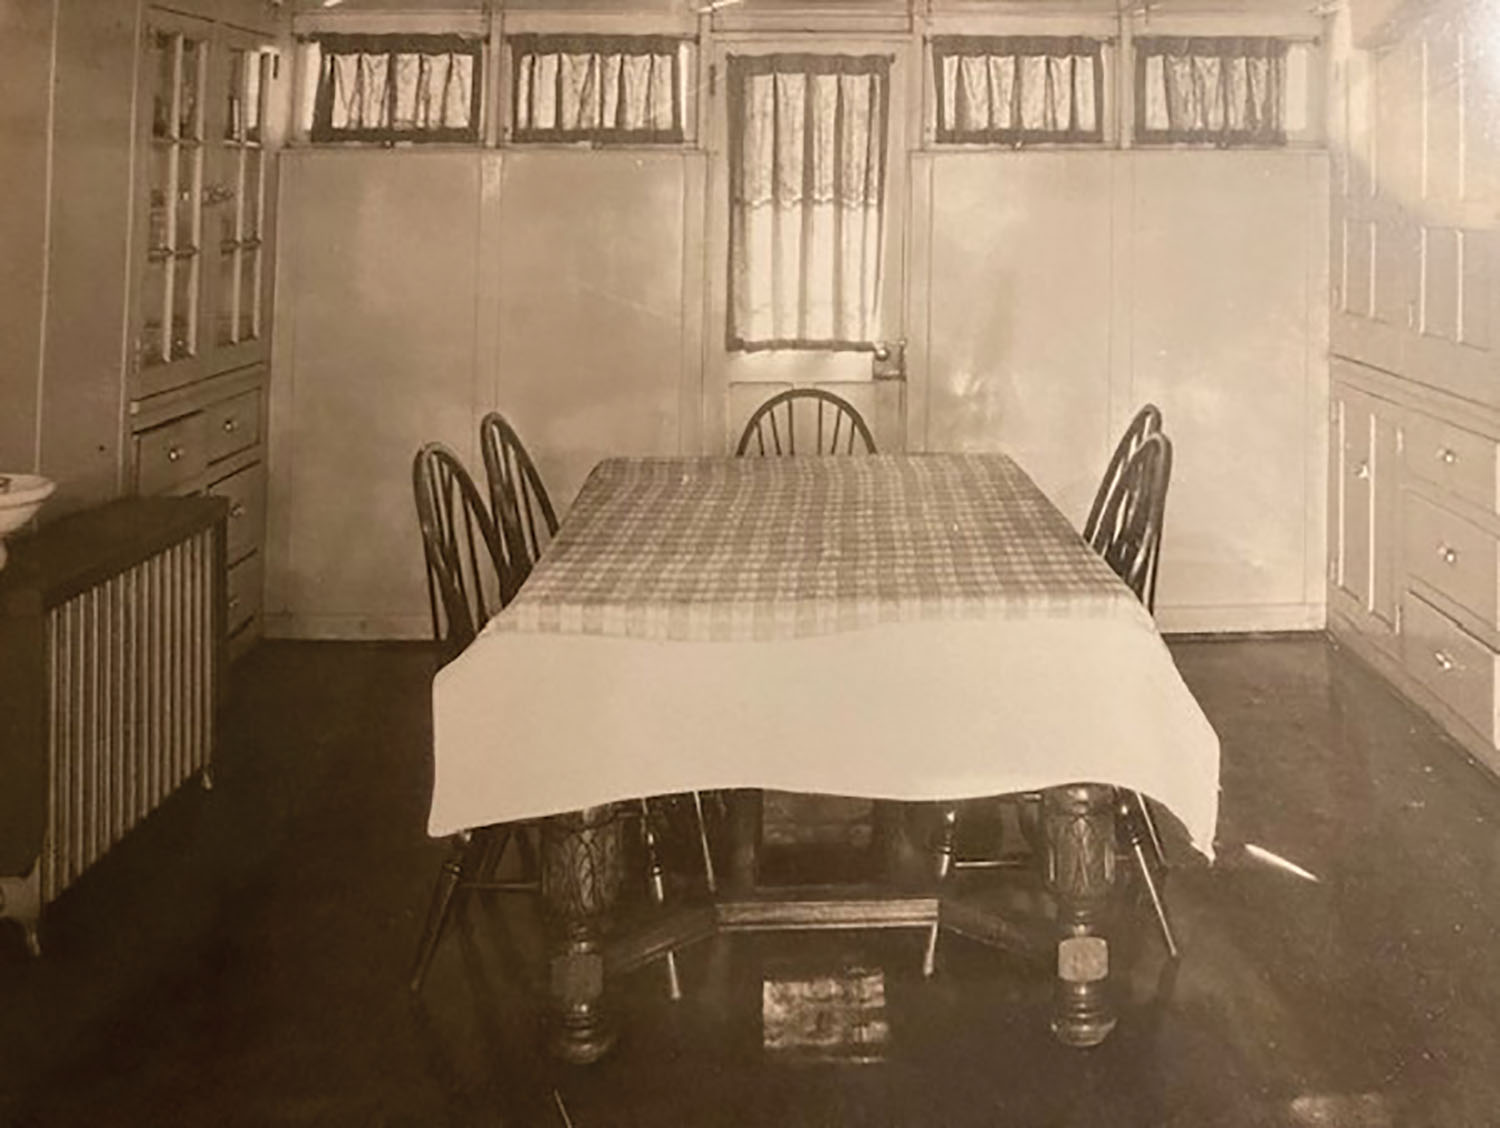 Crew dining area aboard the Str. Sam Craig when new in 1929. (Courtesy of Ed Shearer)